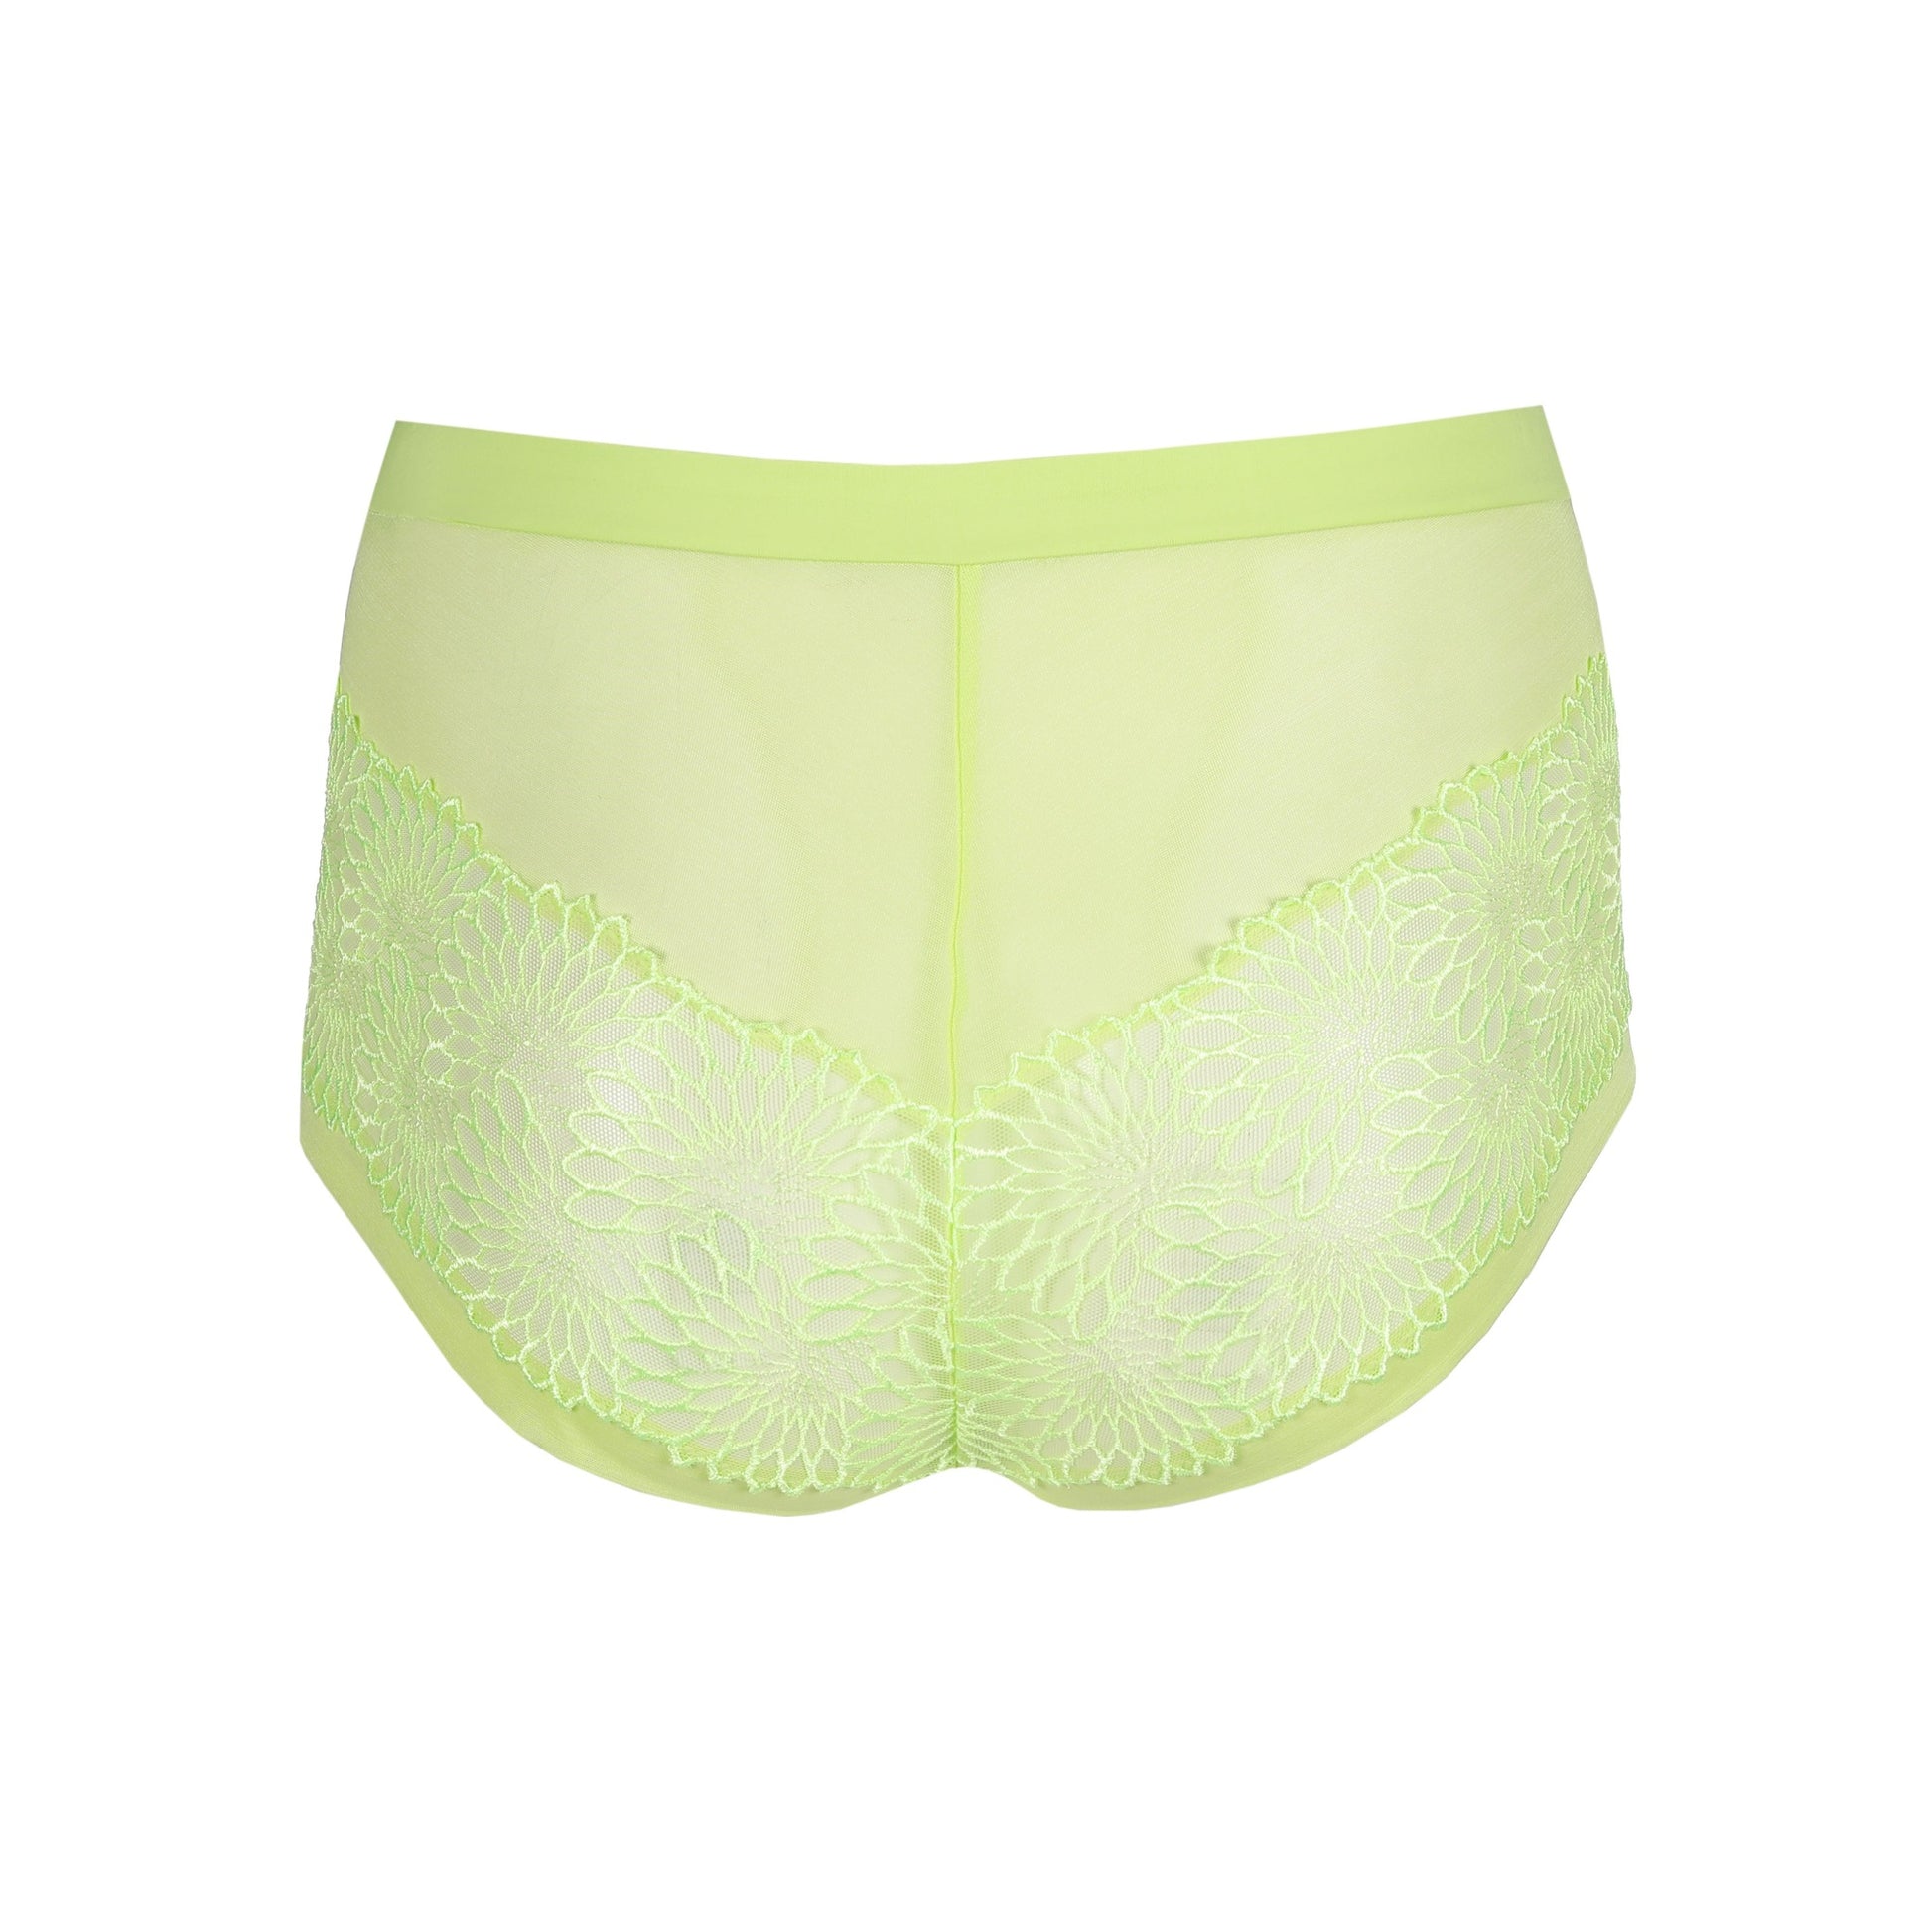 Back view of the Sophora high-waisted cheeky panty in Lime Crush by PrimaDonna.